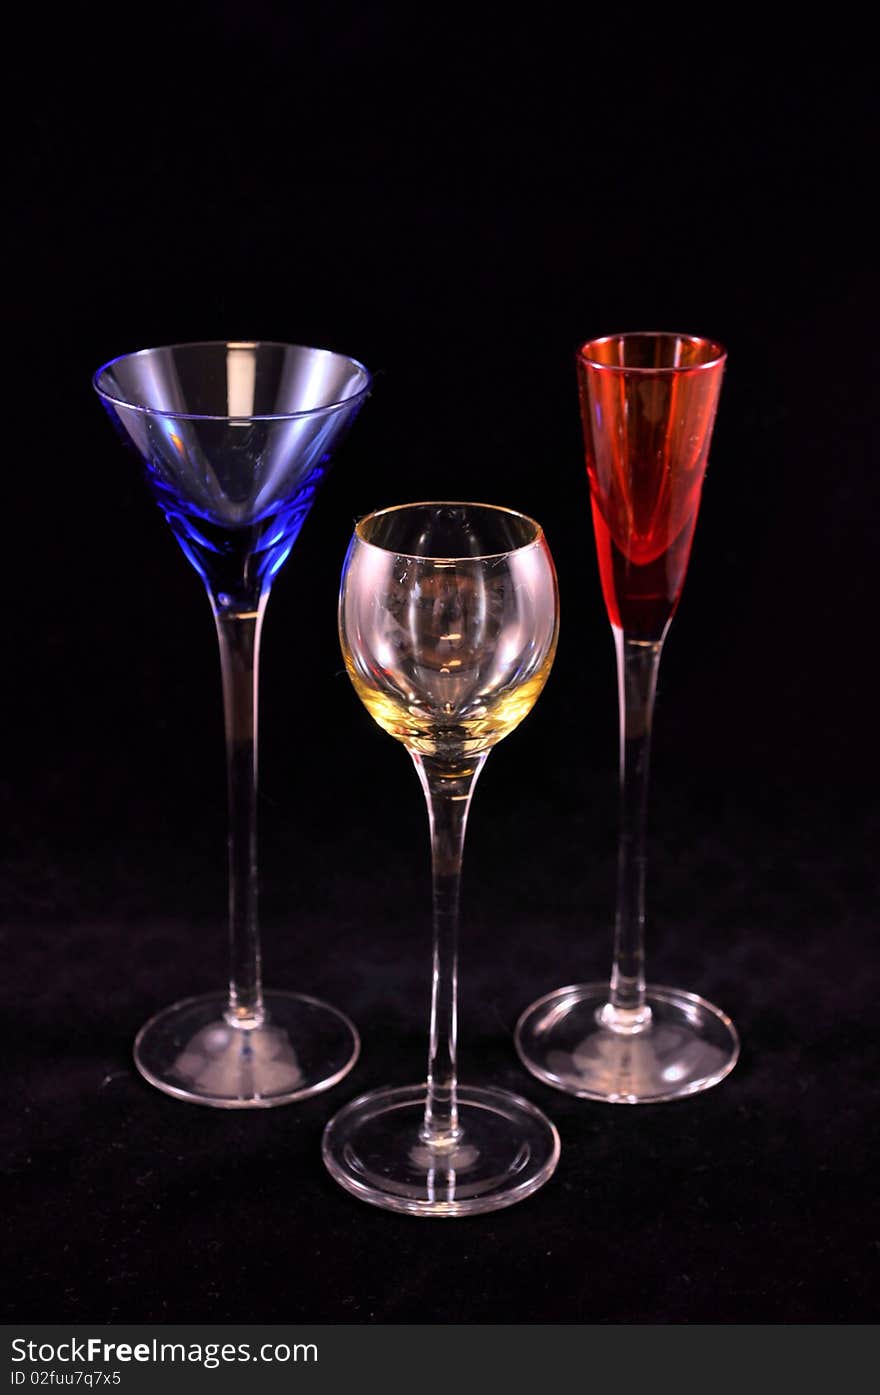 3 drink glasses in primary colors, full view. 3 drink glasses in primary colors, full view